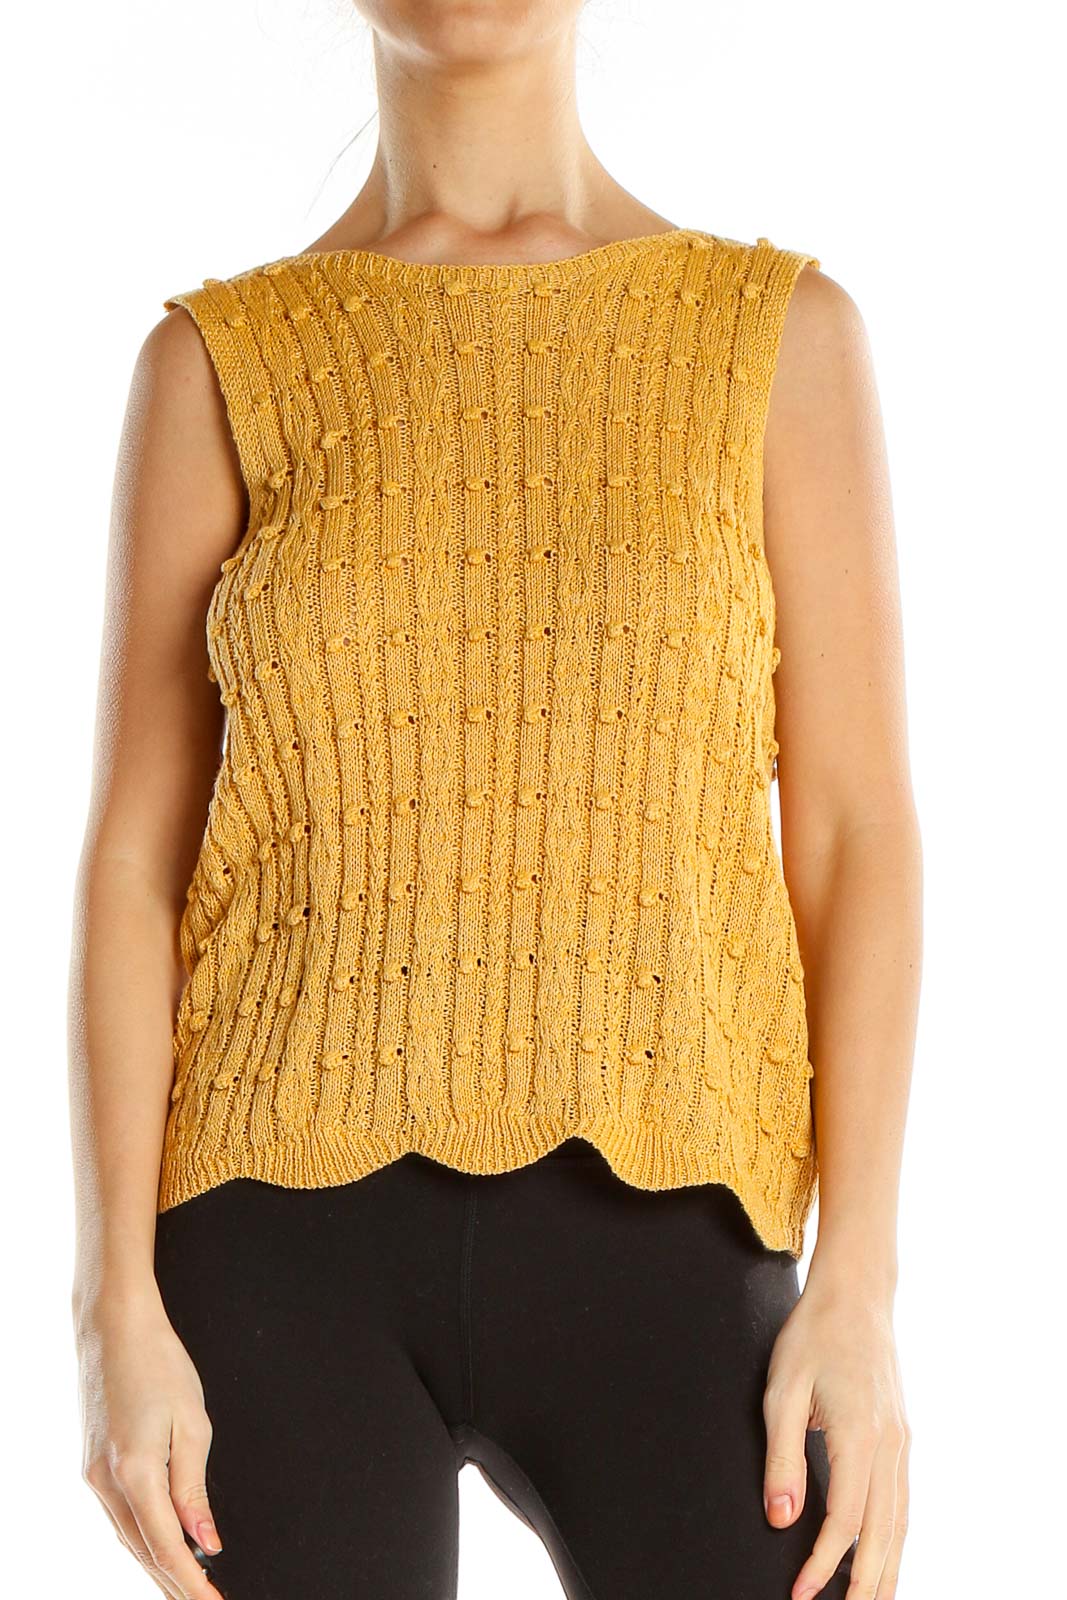 Yellow Knit All Day Wear Sweater Top Front